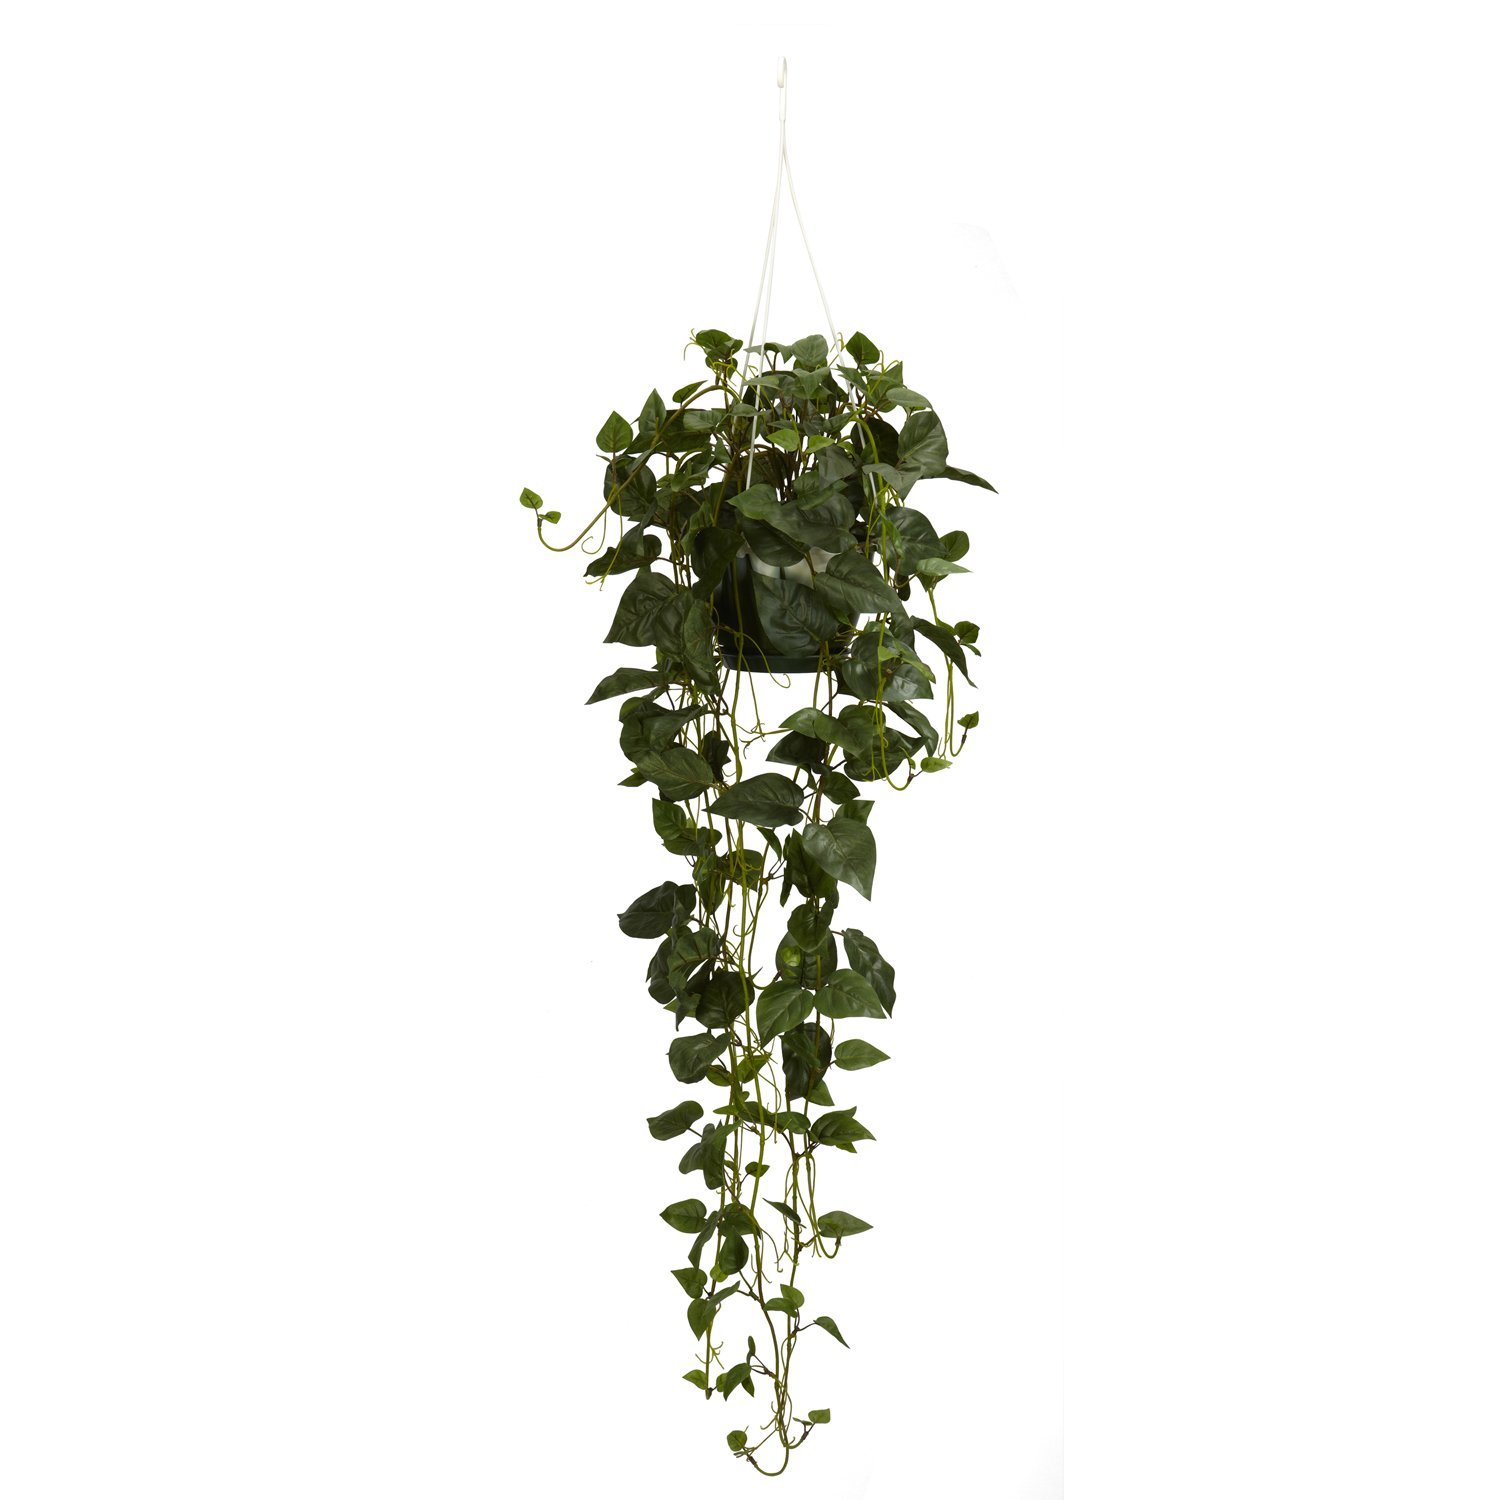 Amazon.com: Nearly Natural 4762 Philodendron Hanging Basket ...